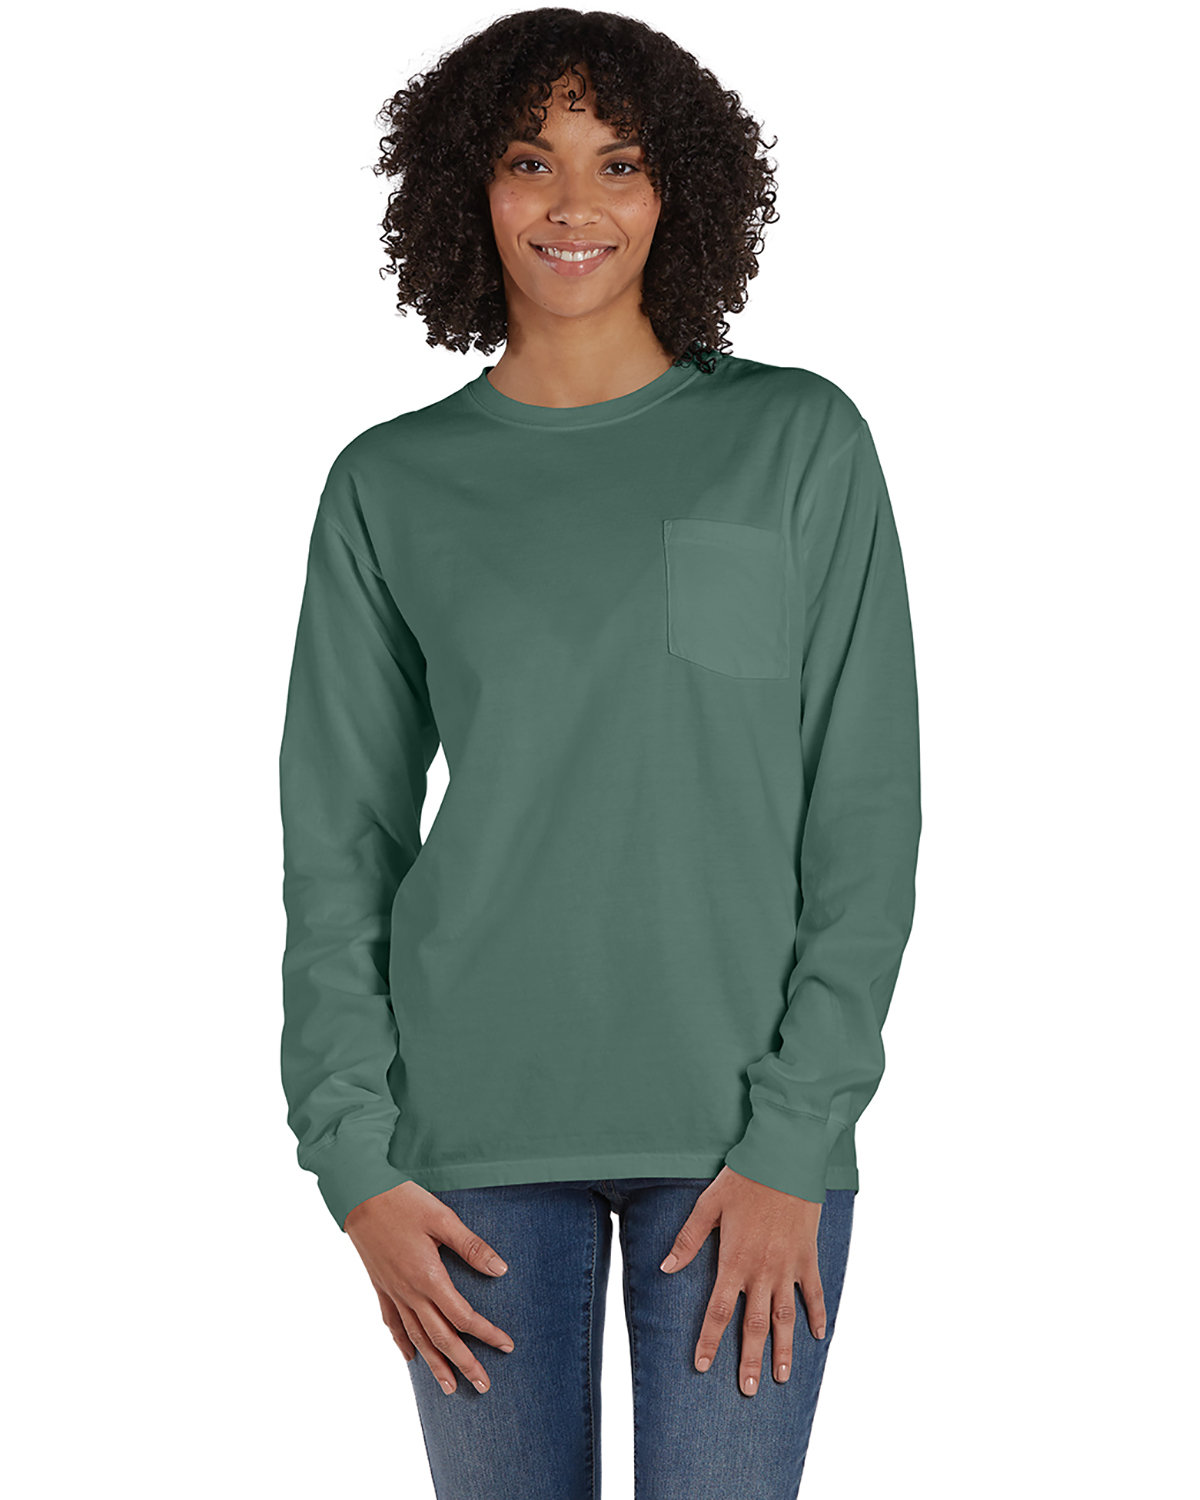 ComfortWash by Hanes Unisex Garment-Dyed Long-Sleeve T-Shirt with Pocket CYPRESS GREEN 